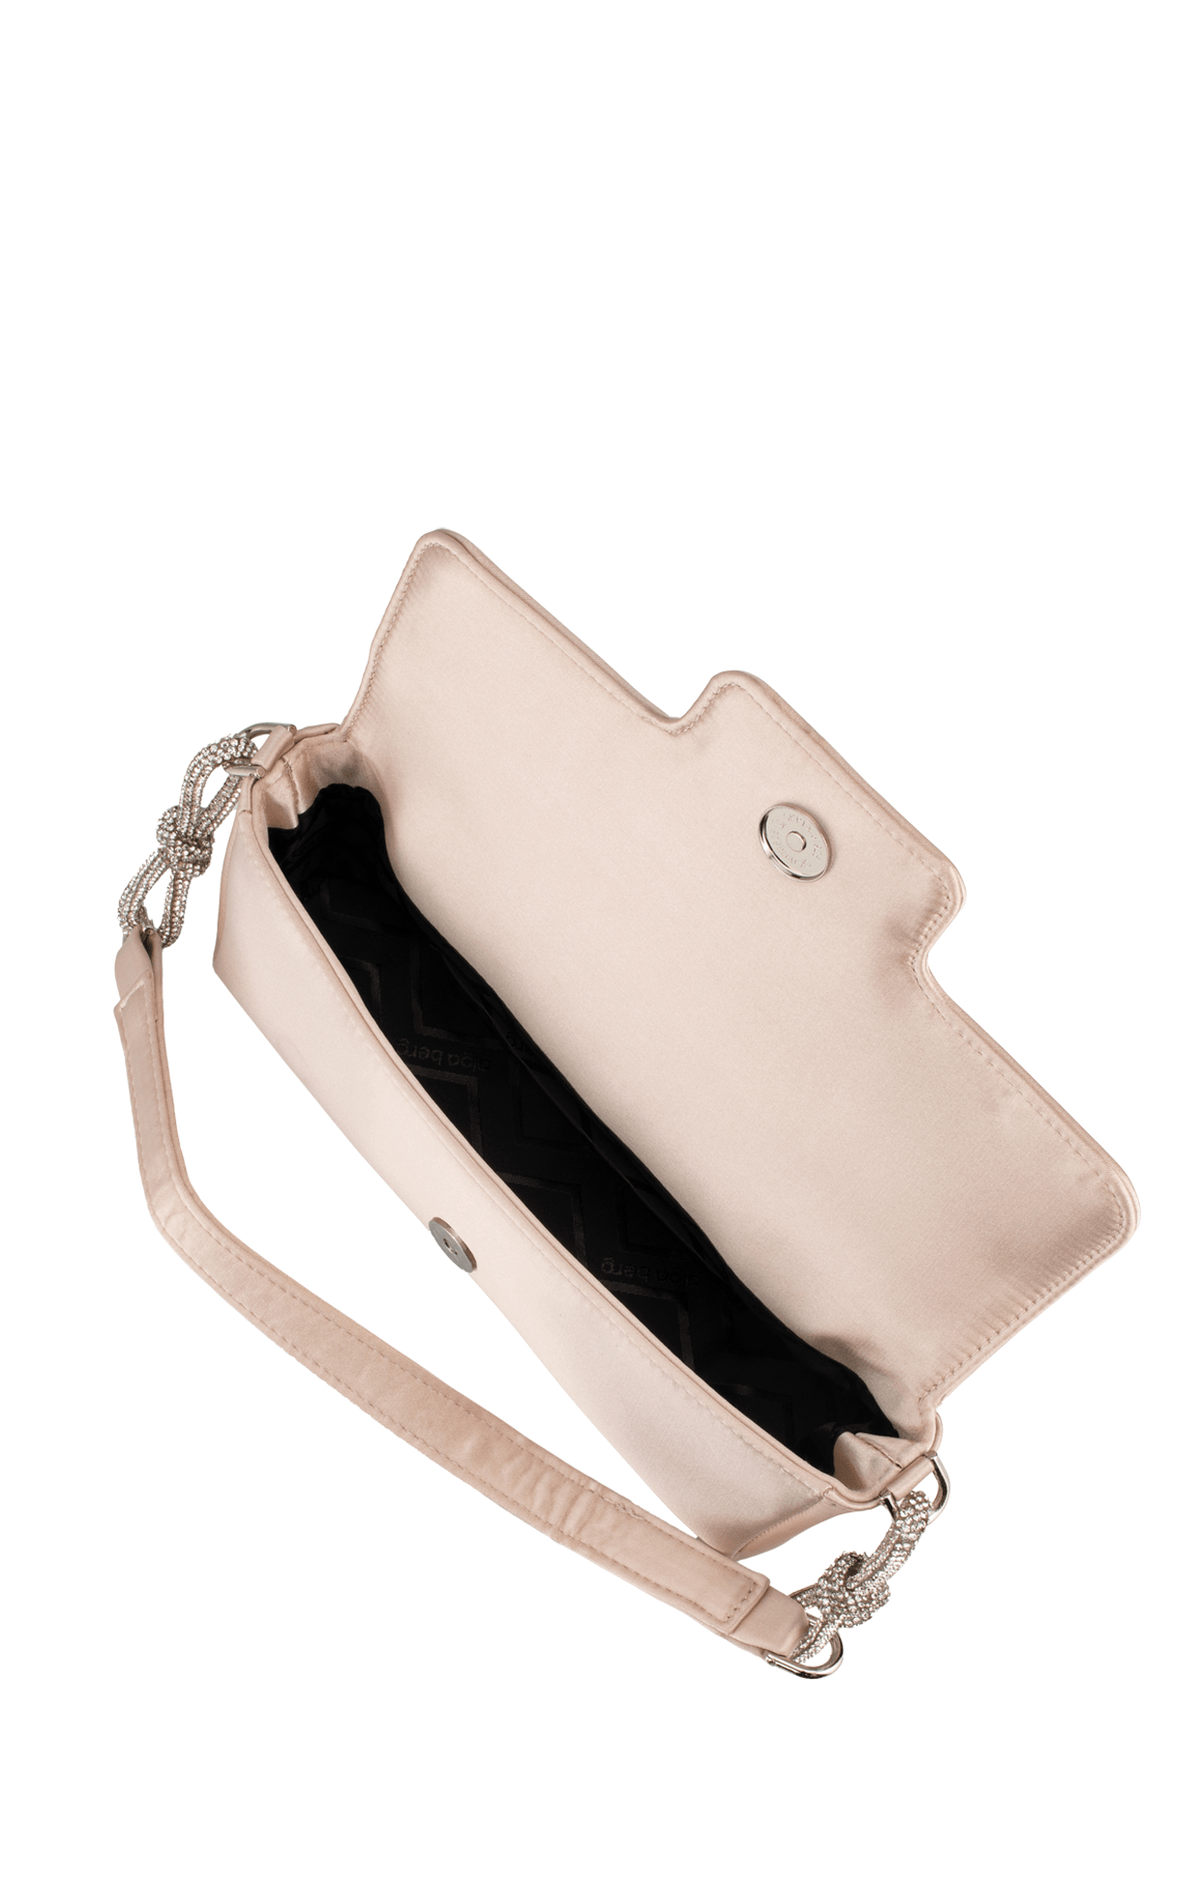 Multi Occasion OS / PINK CALISSA CRYSTAL BOW BAG IN BLUSH